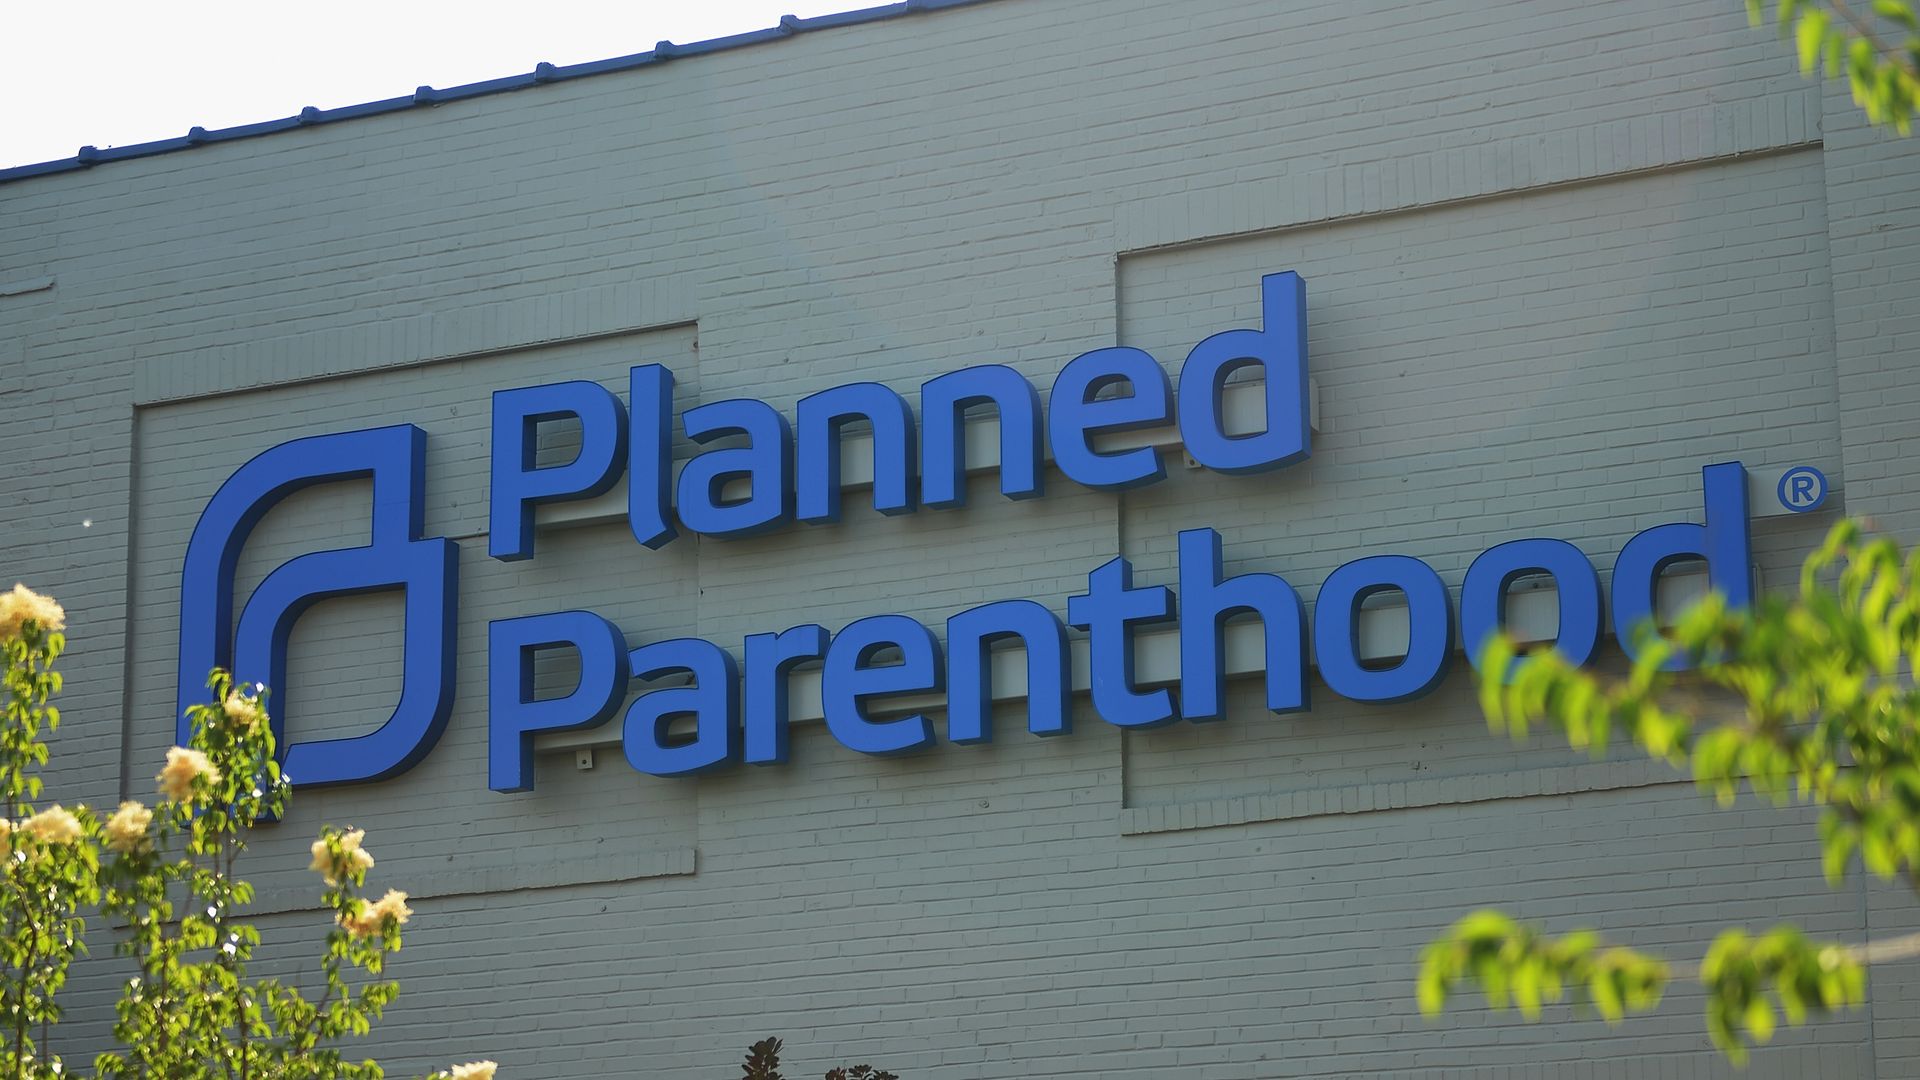 This image shows the Planned Parenthood logo on the side of a white building on a sunny day, with two trees framing the sign.